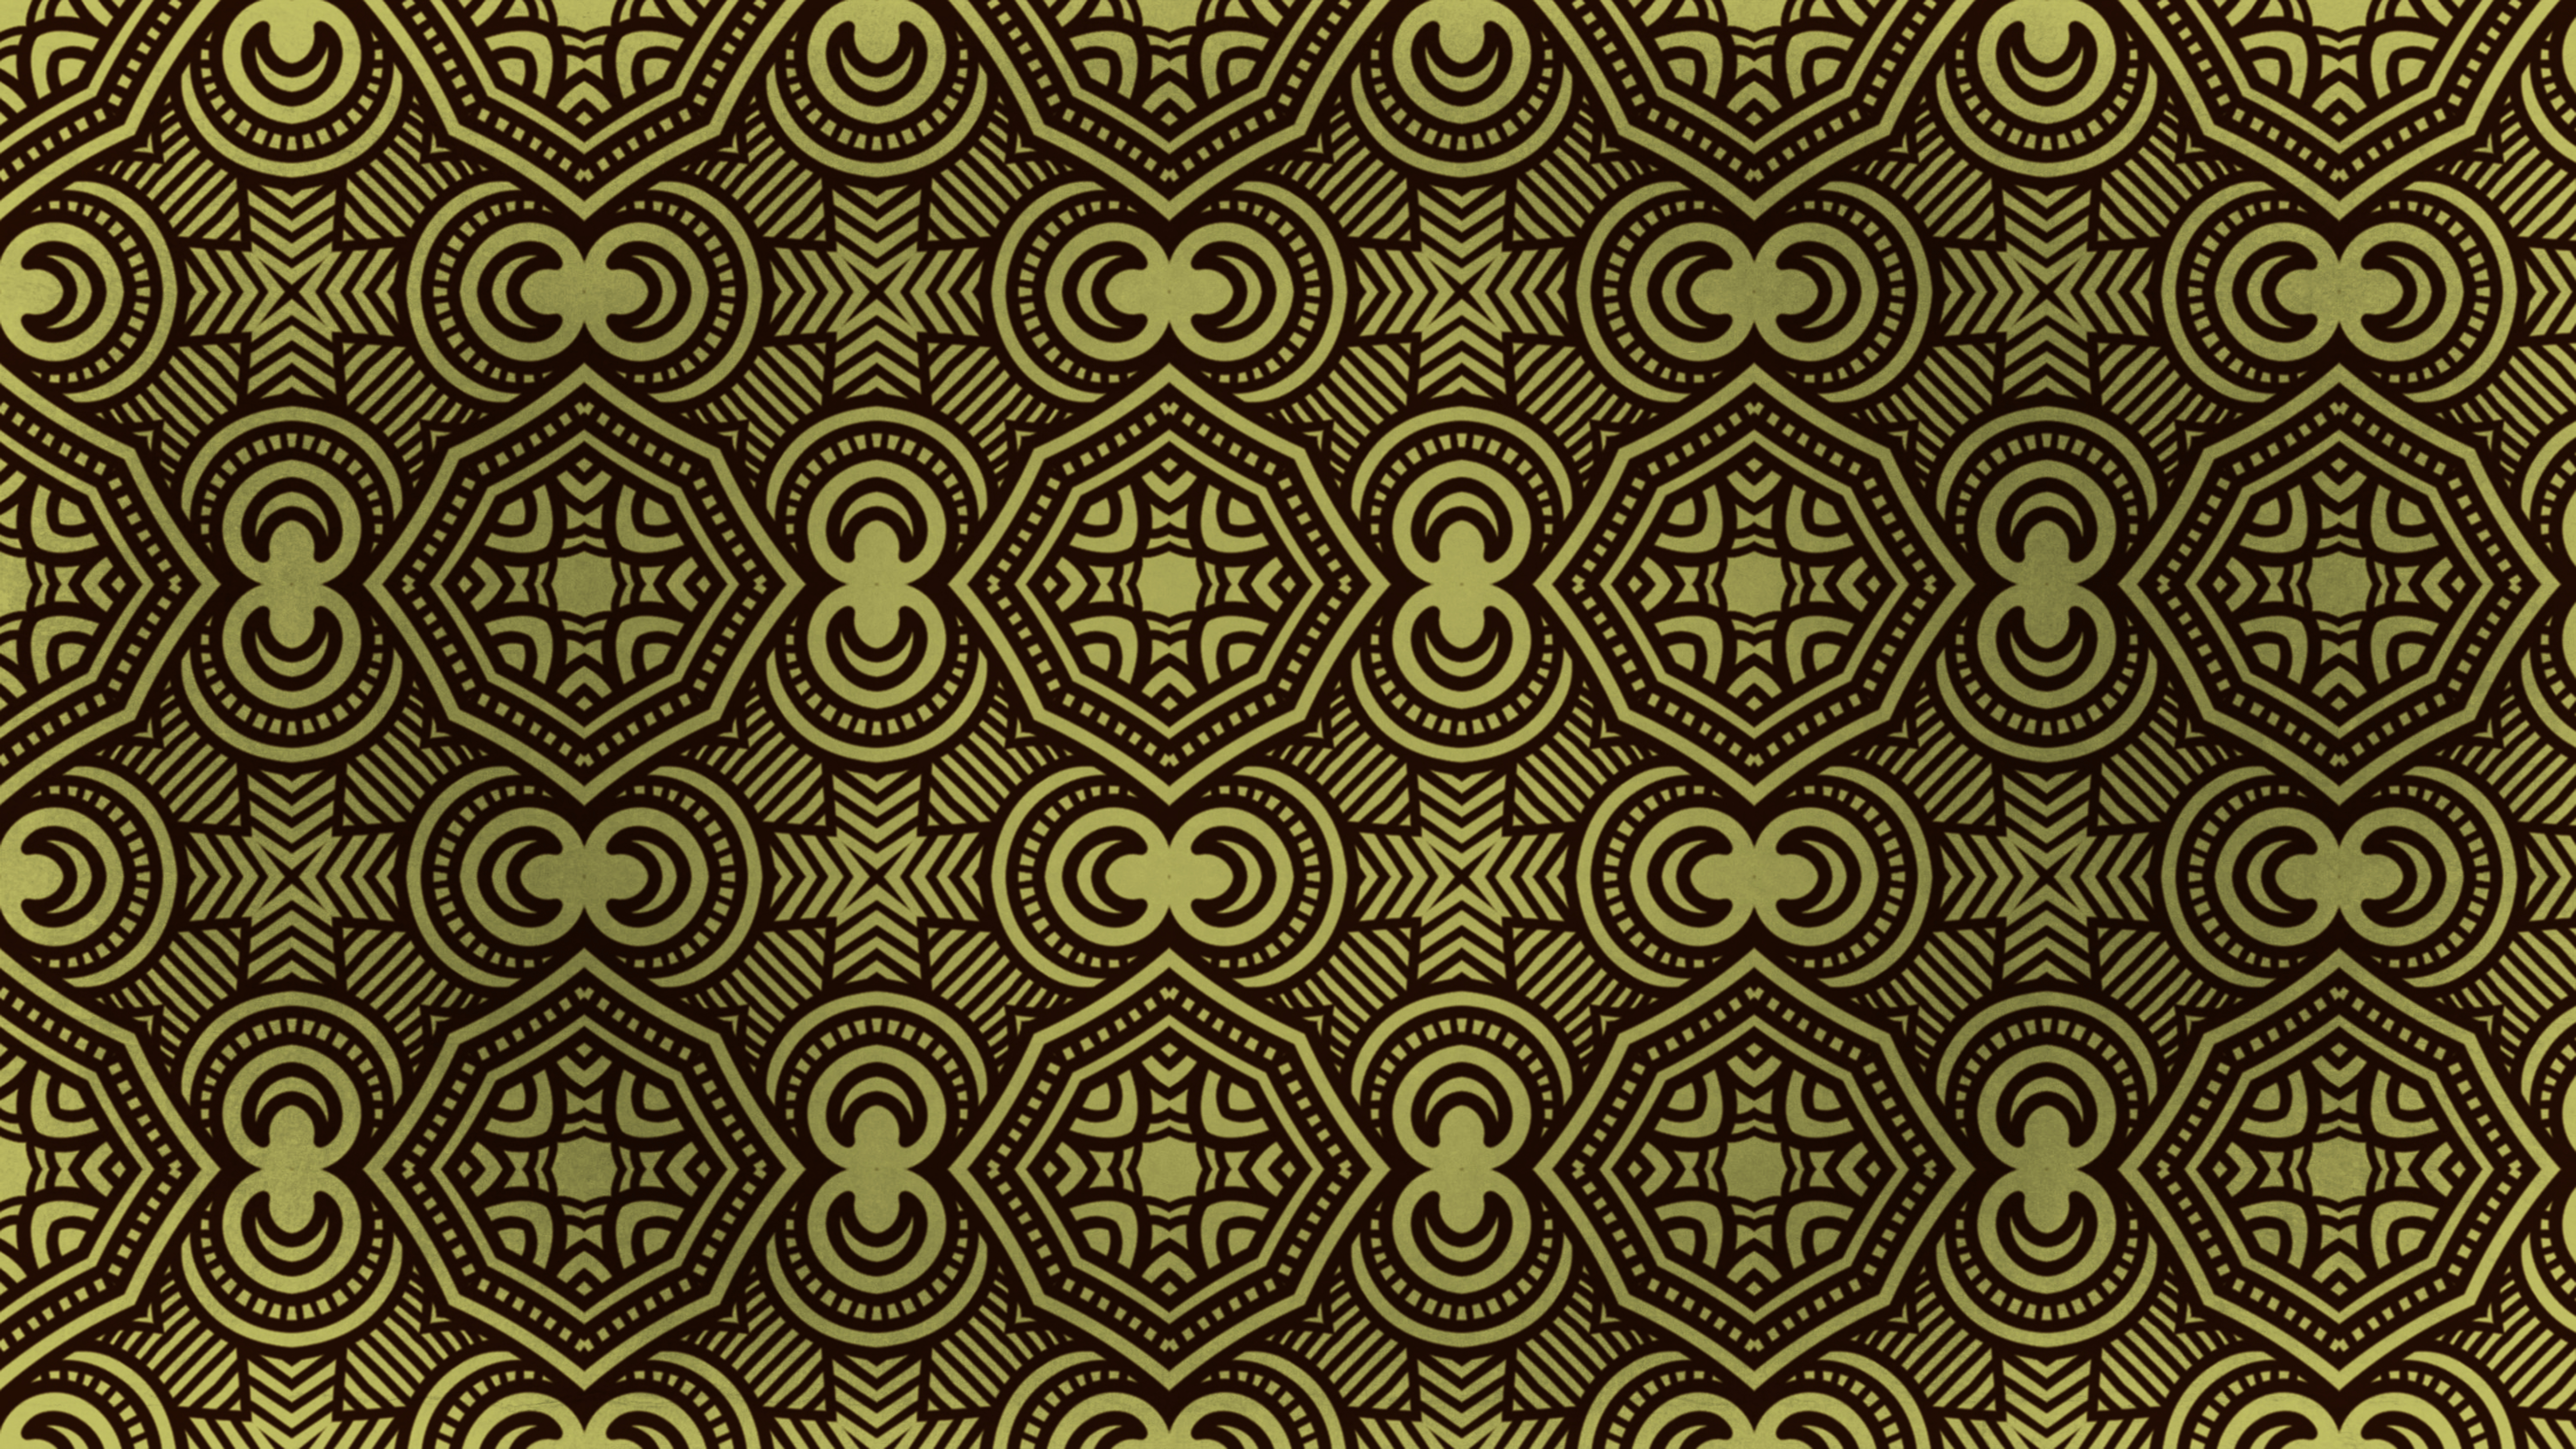 Free Brown and Gold Vintage Ornamental Seamless Pattern Background Design